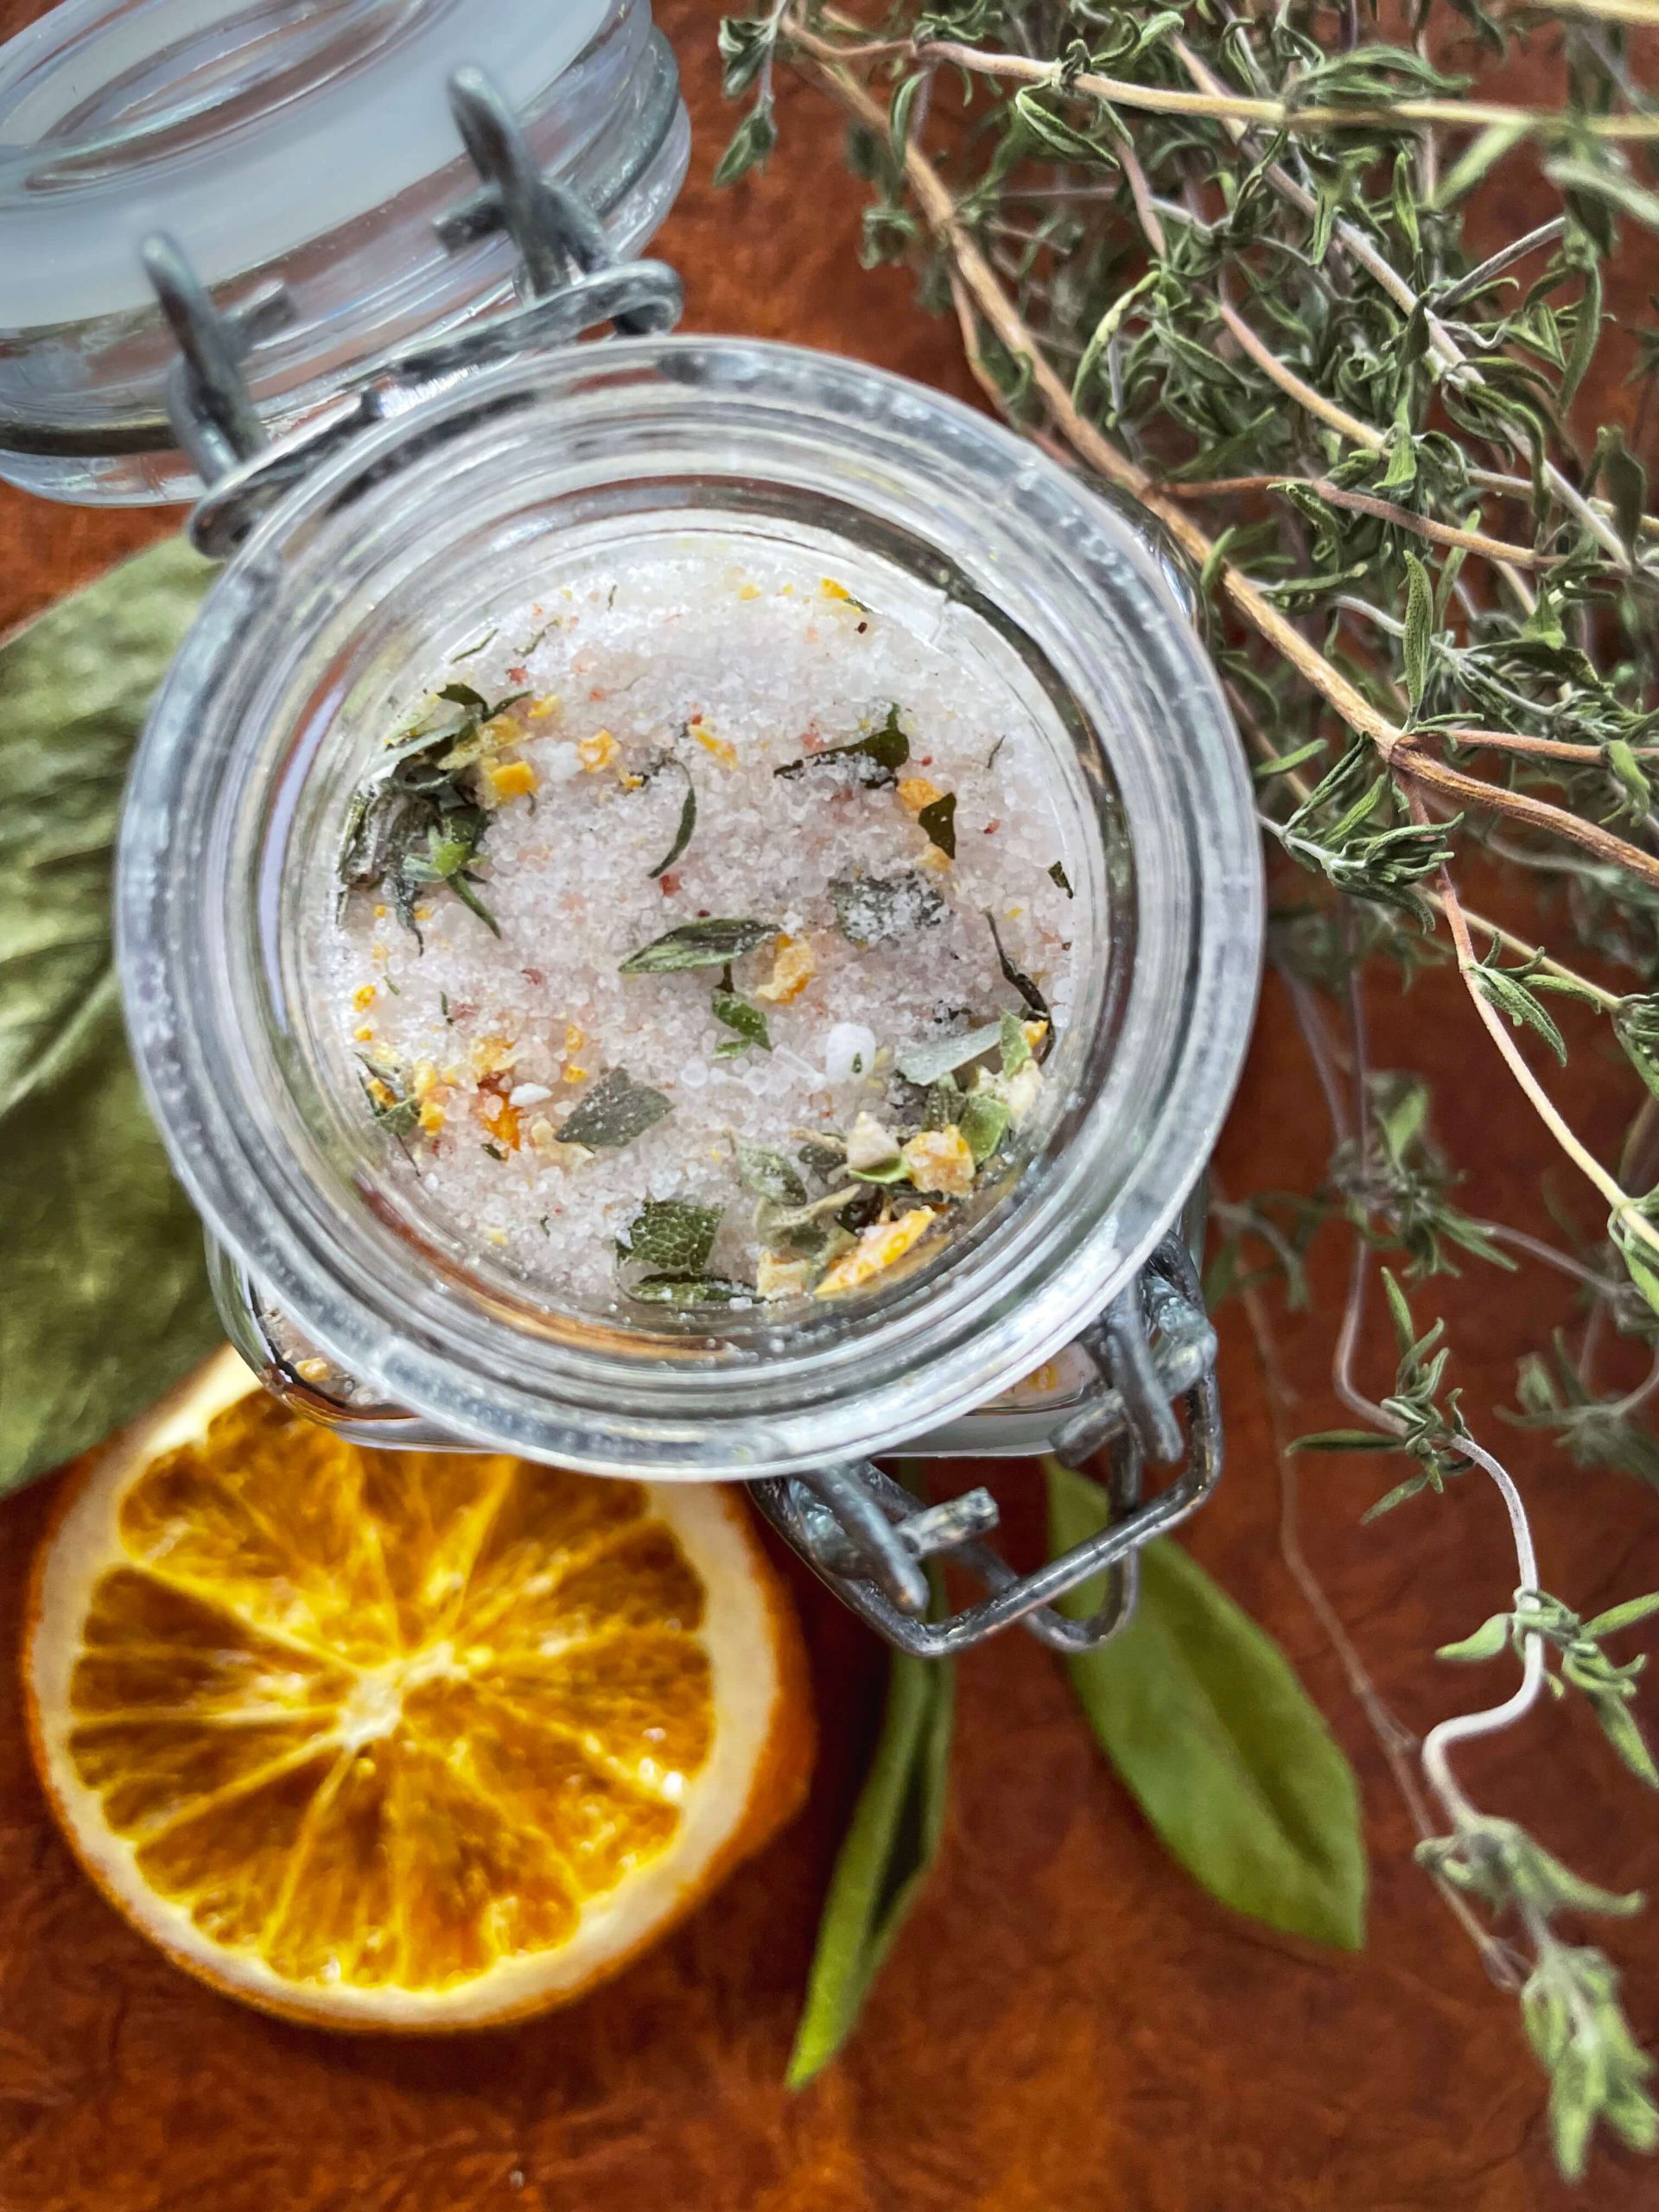 An open jar of wild bay orange thyme sitting on a table with herbs, citrus, and other items scattered below.